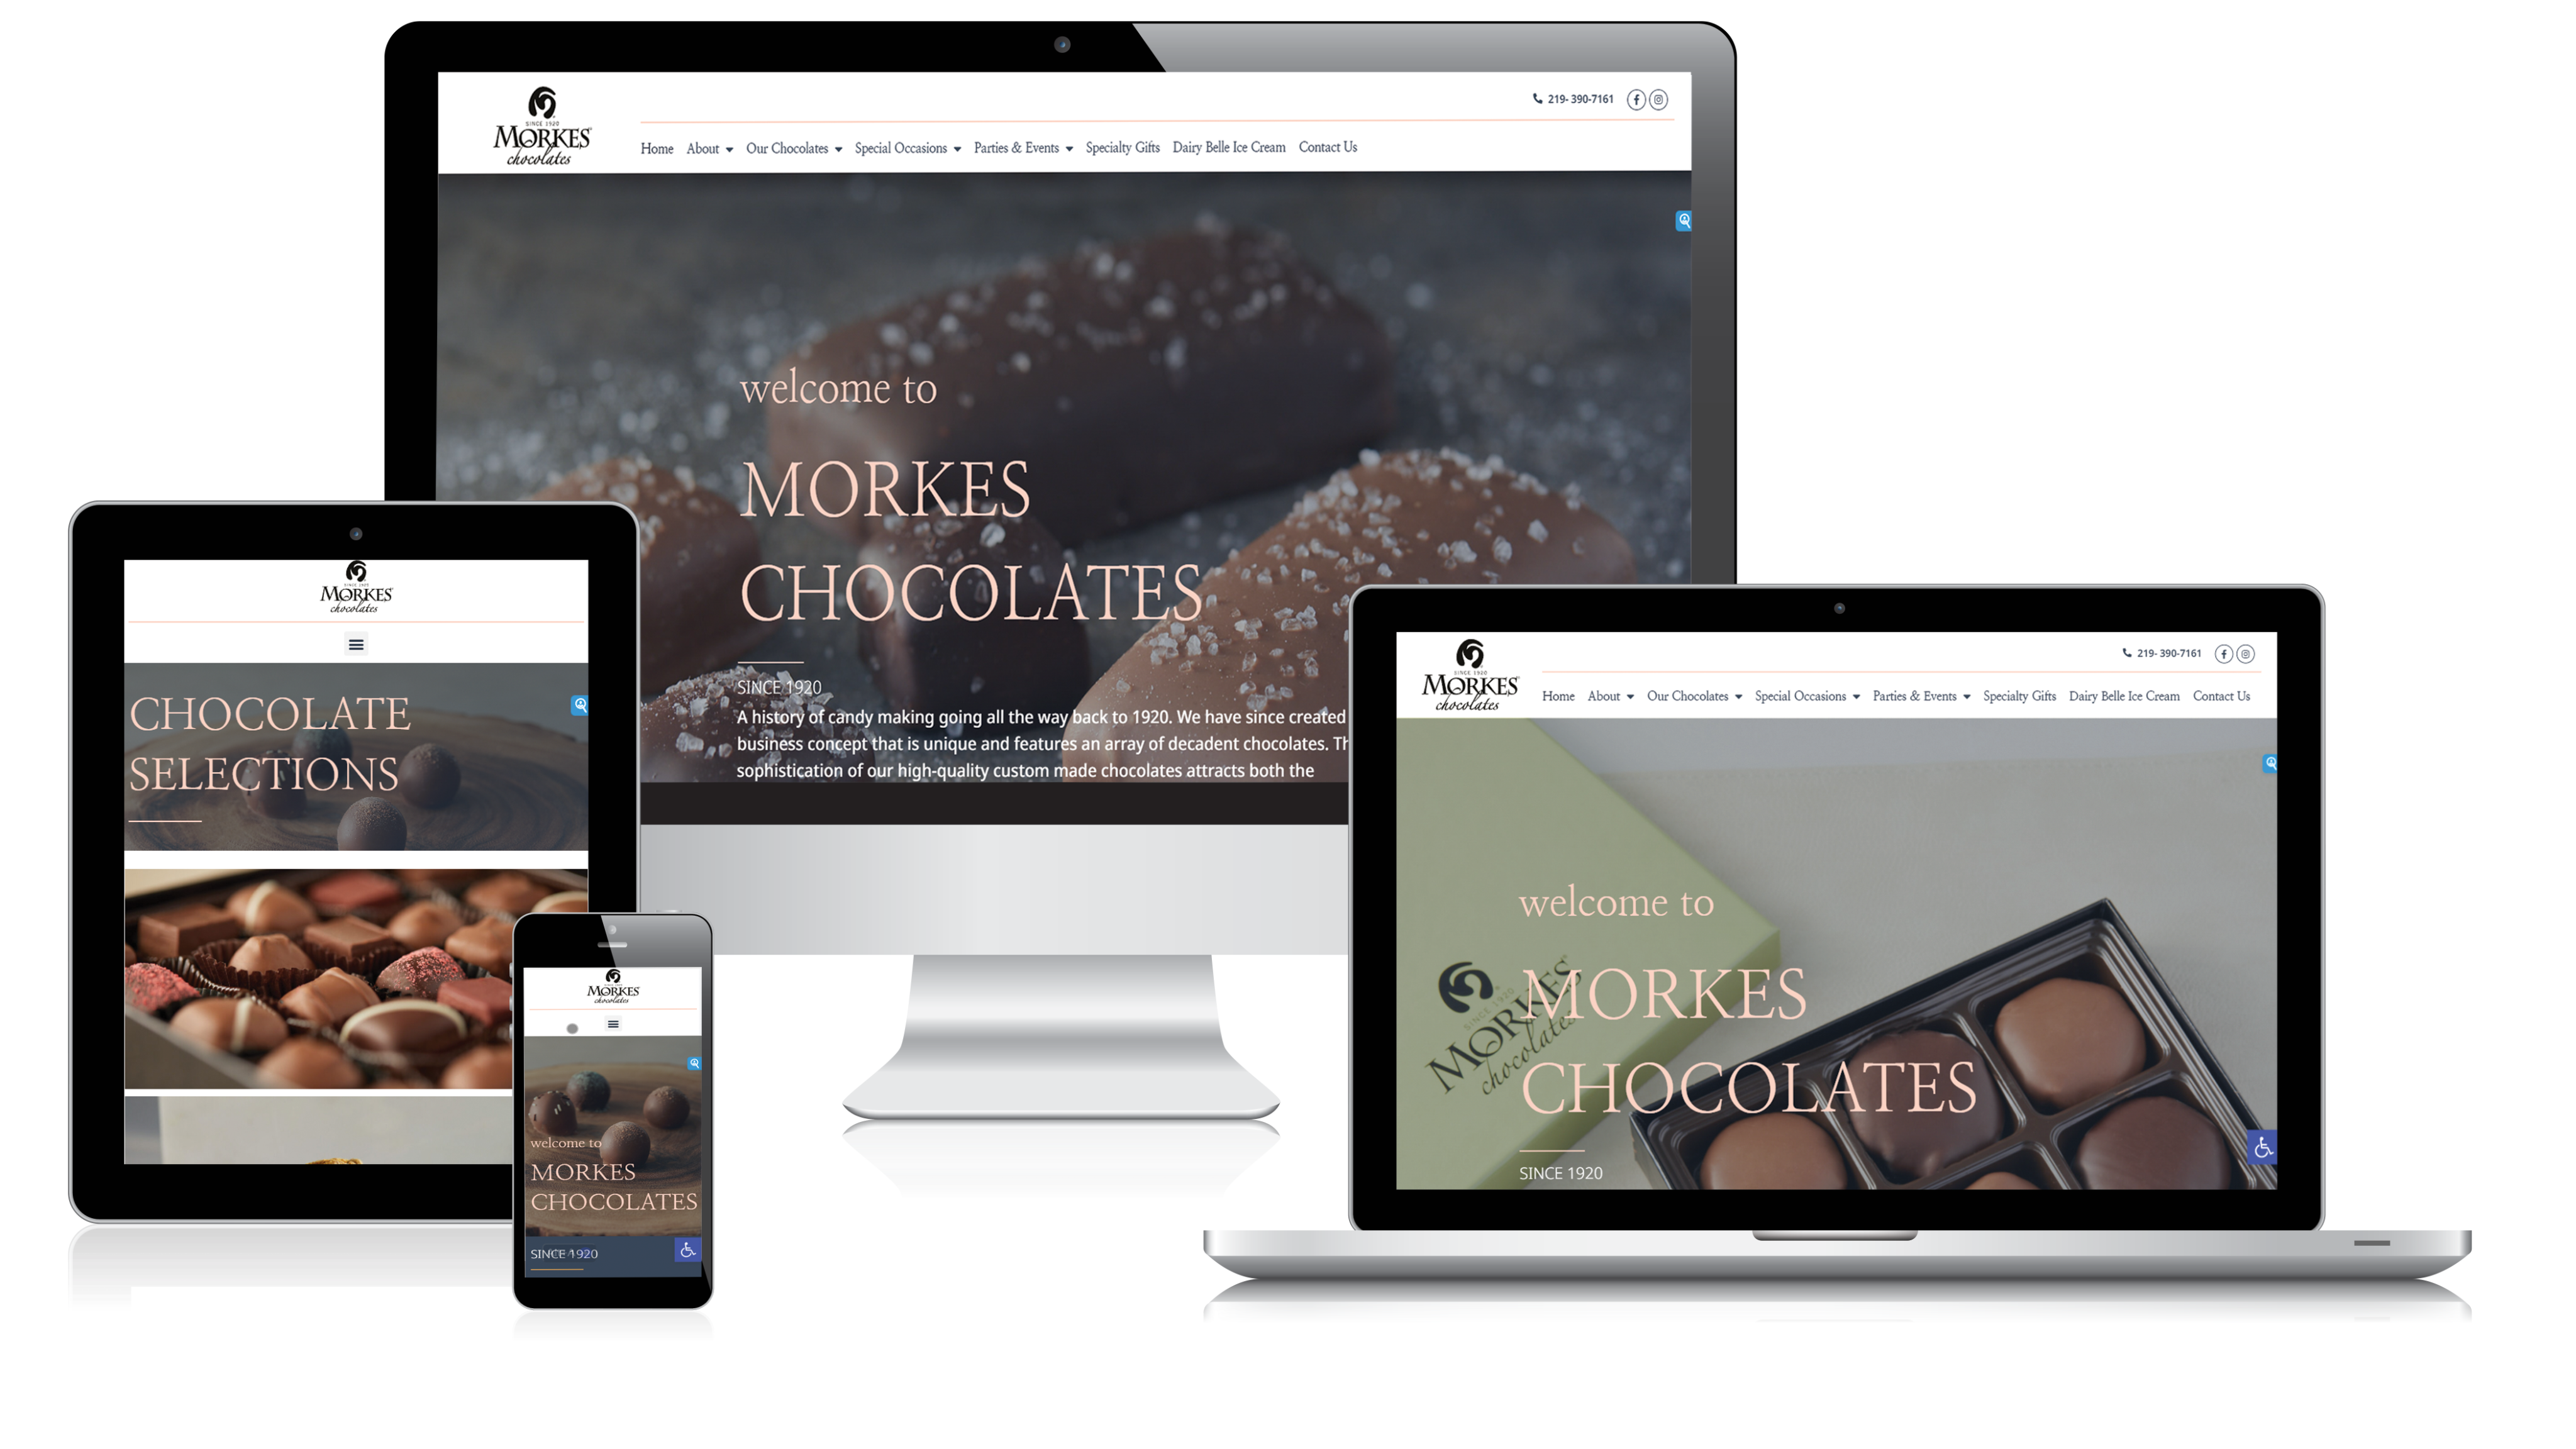 Image Morkes Chocolate Website With SEO In Mind